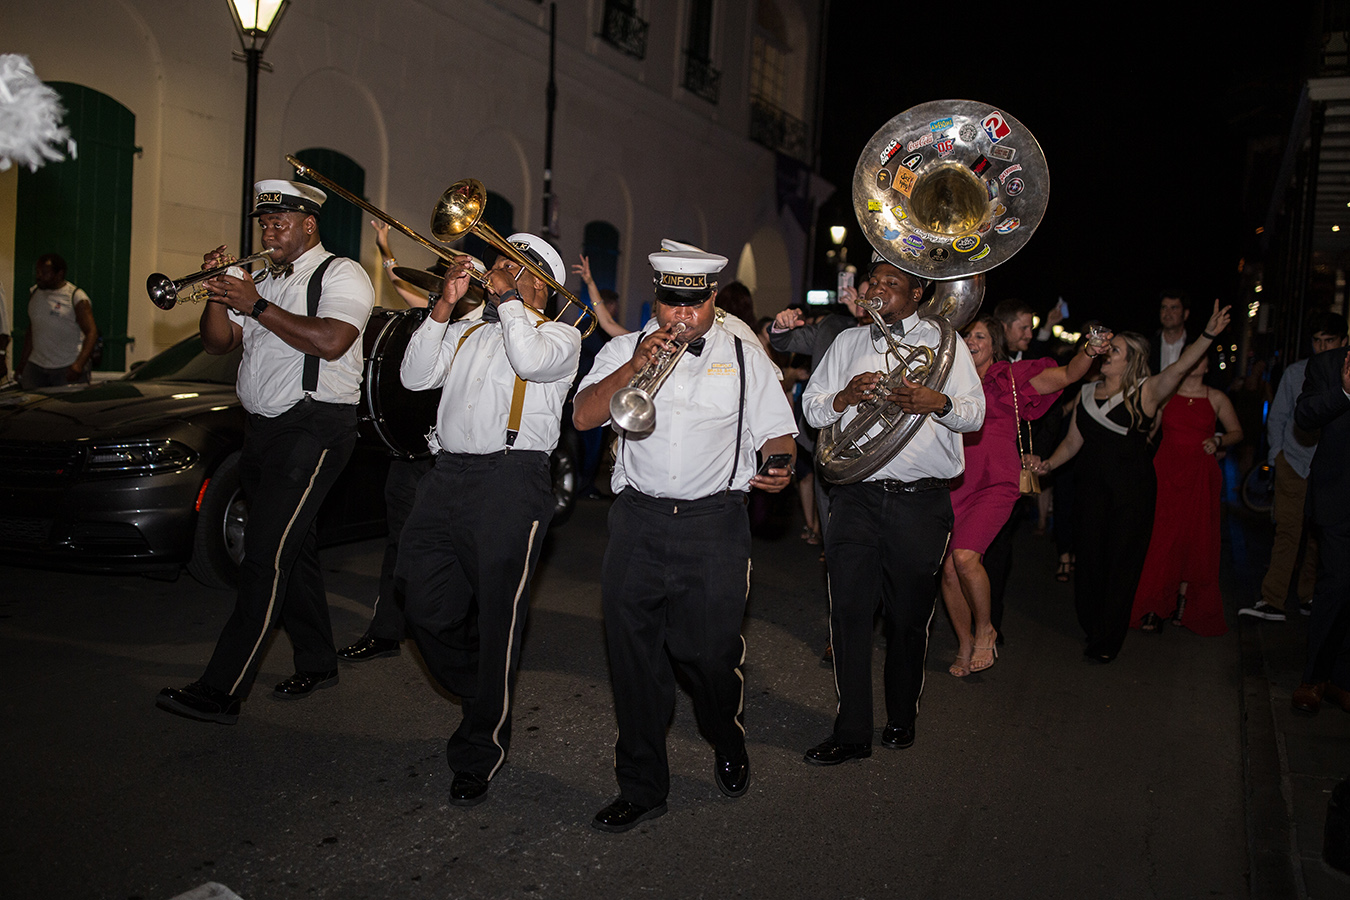 The reception ended with a traditional New Orleans second line through the streets of the French Quarter.